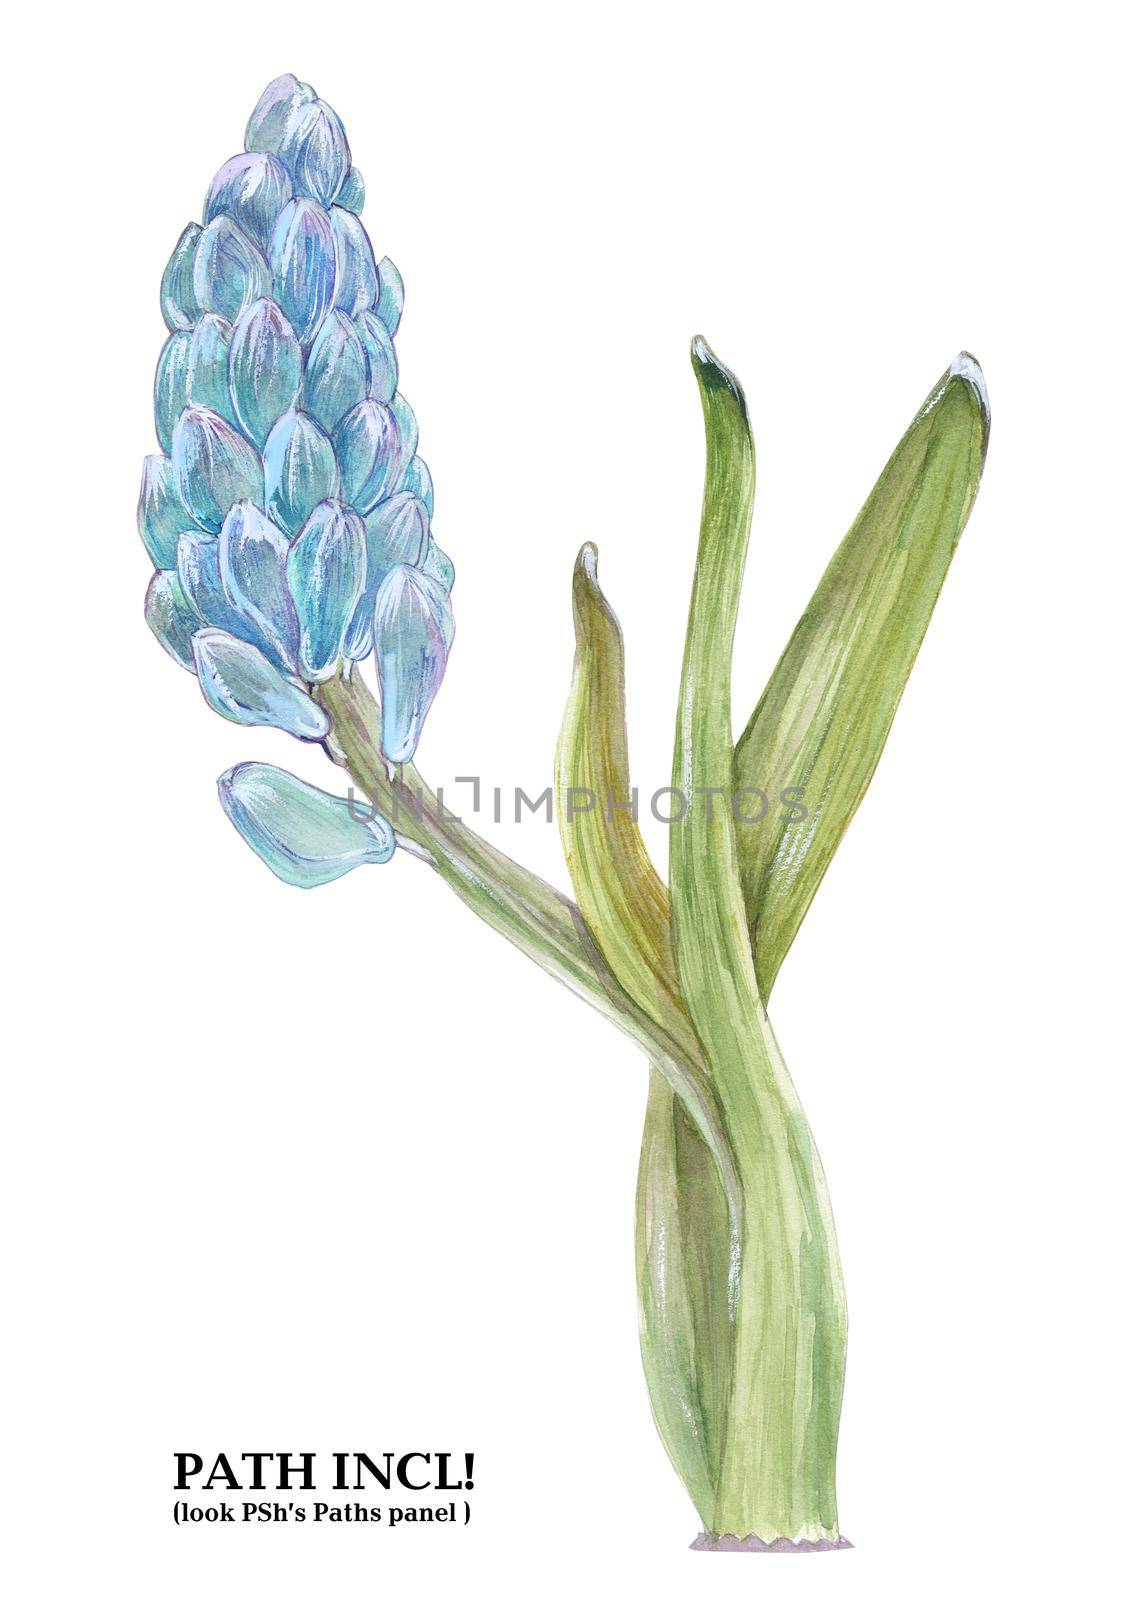 Watercolor botanical illustration. Hyacinth on a white background, path included.